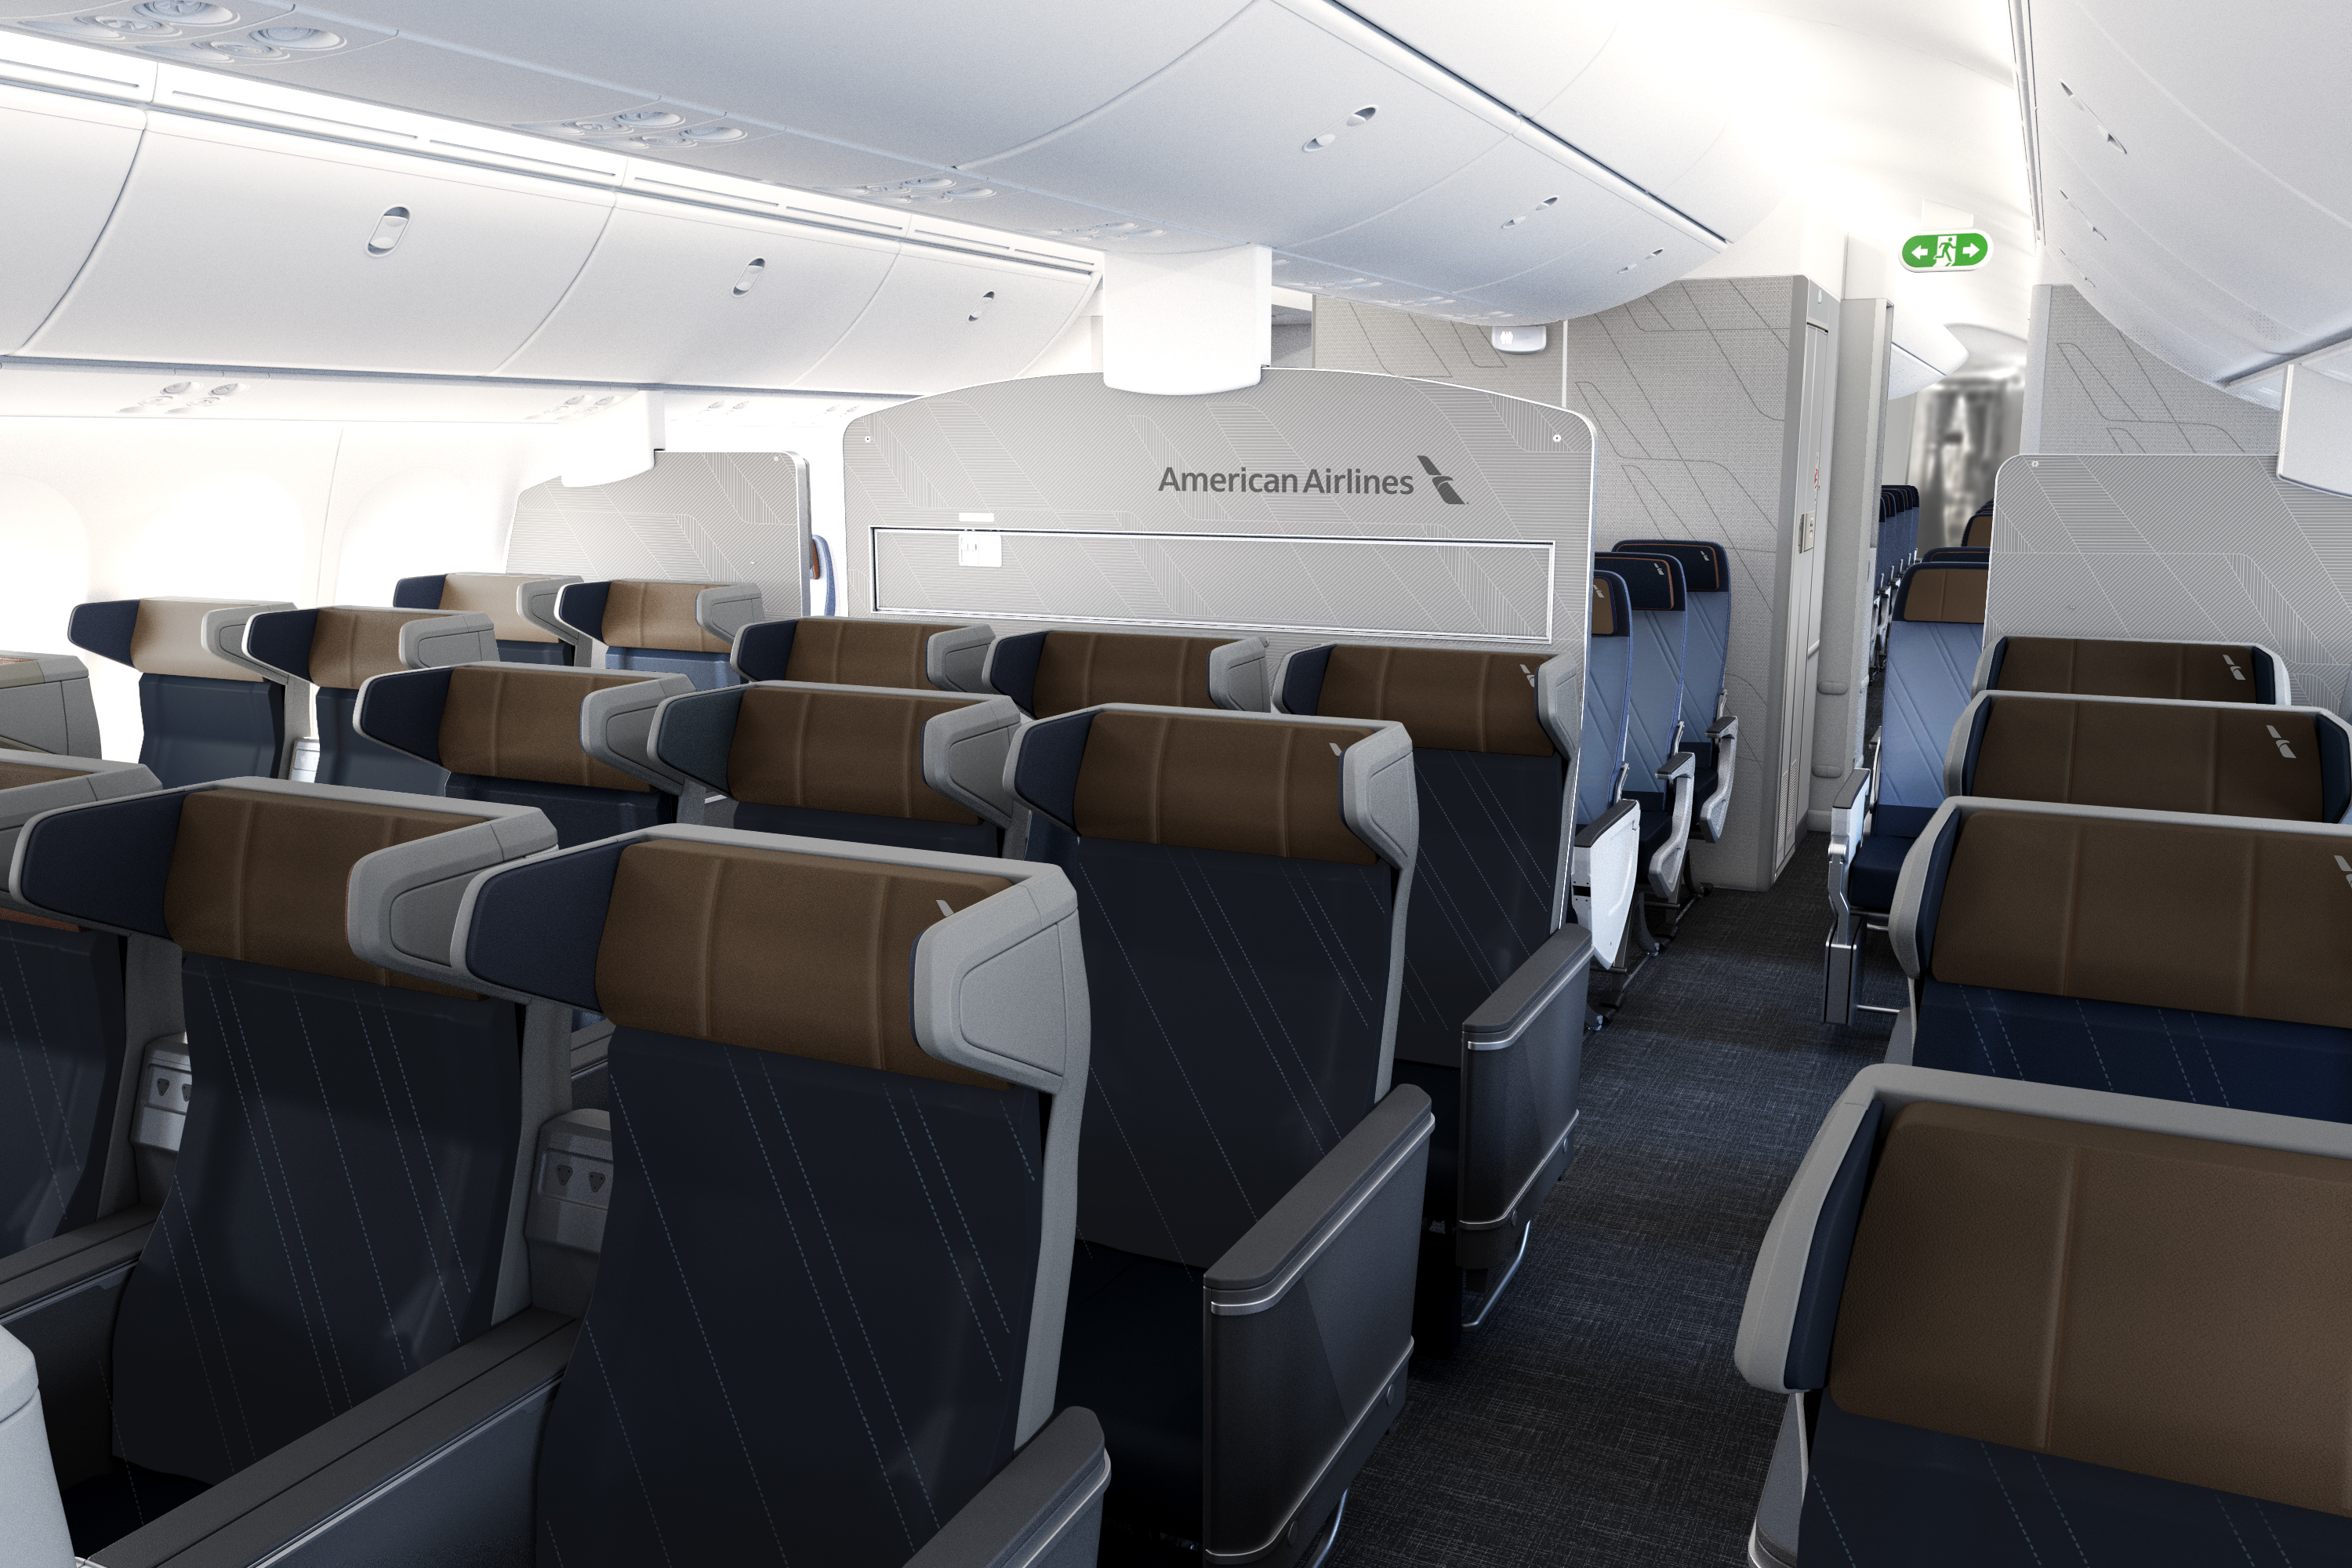 A Private Premium Experience In The Sky American Airlines Introduces New Flagship Suite Seats Newsroom